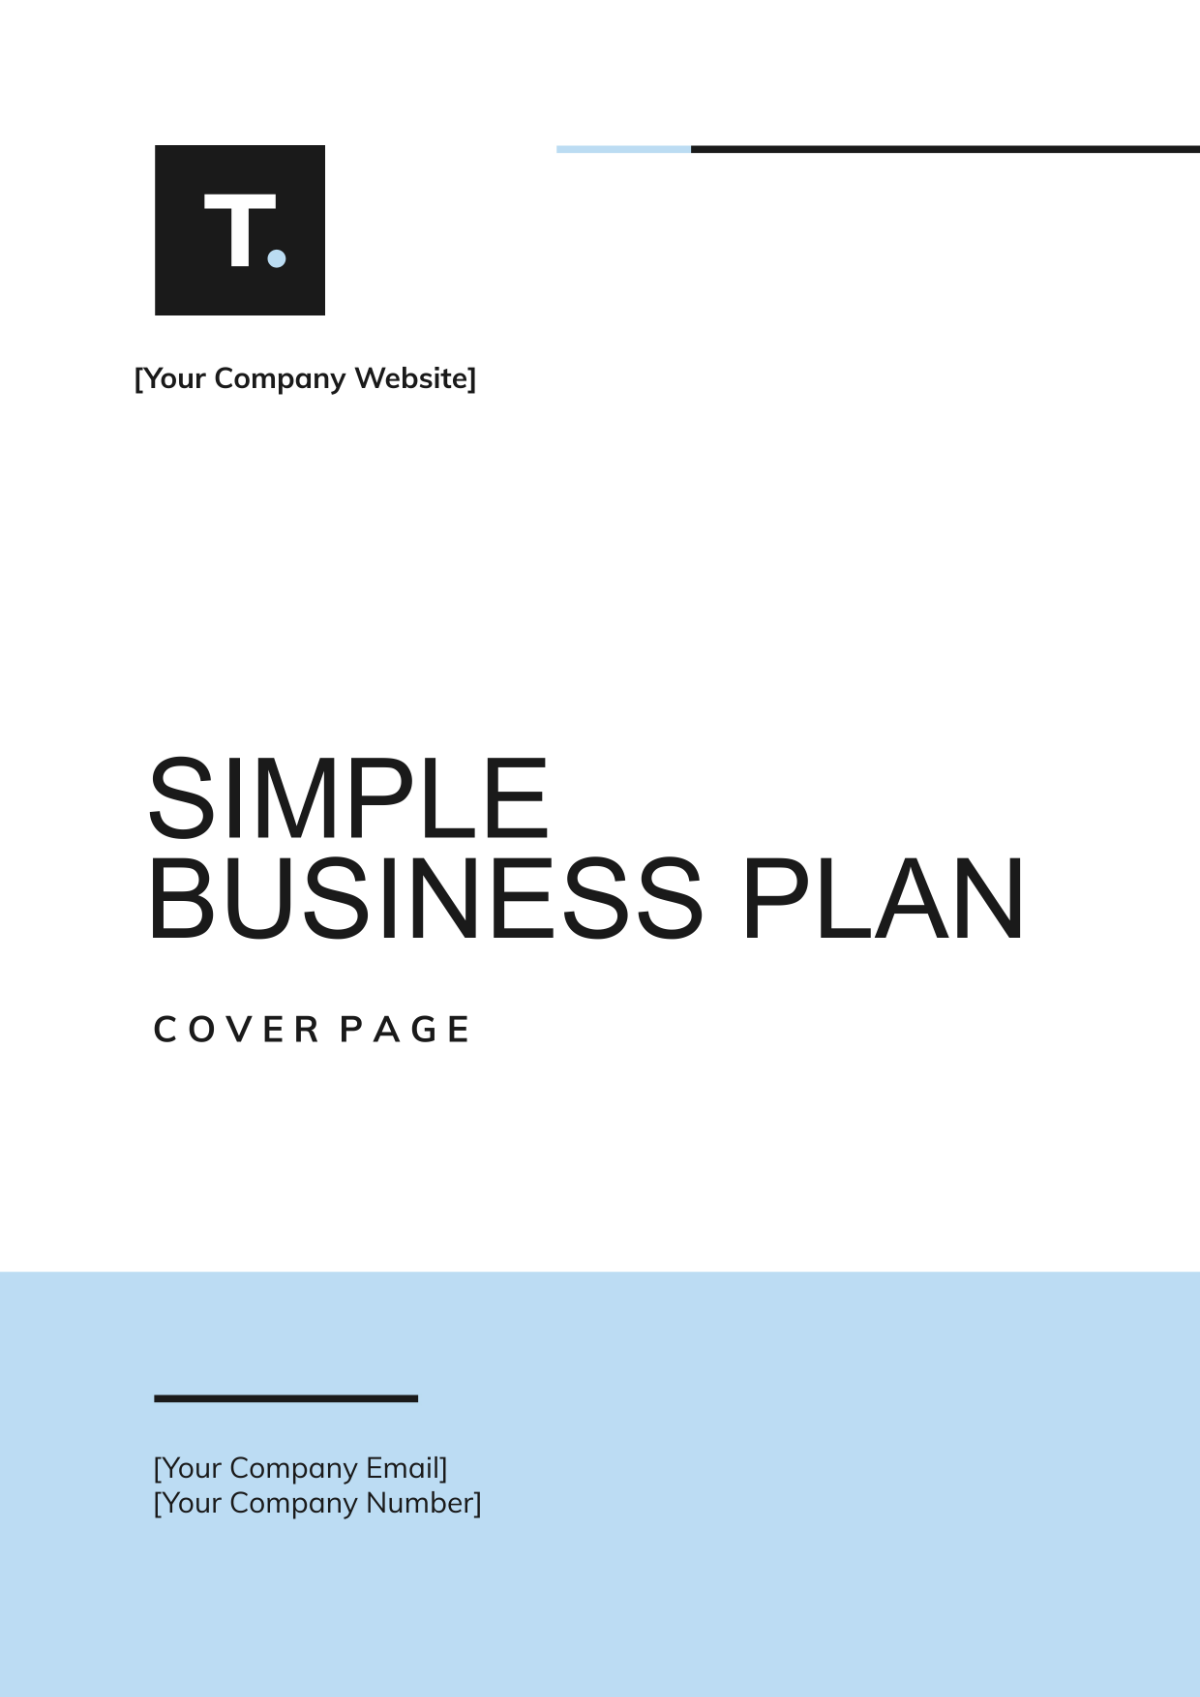 Simple Business Plan Cover Page